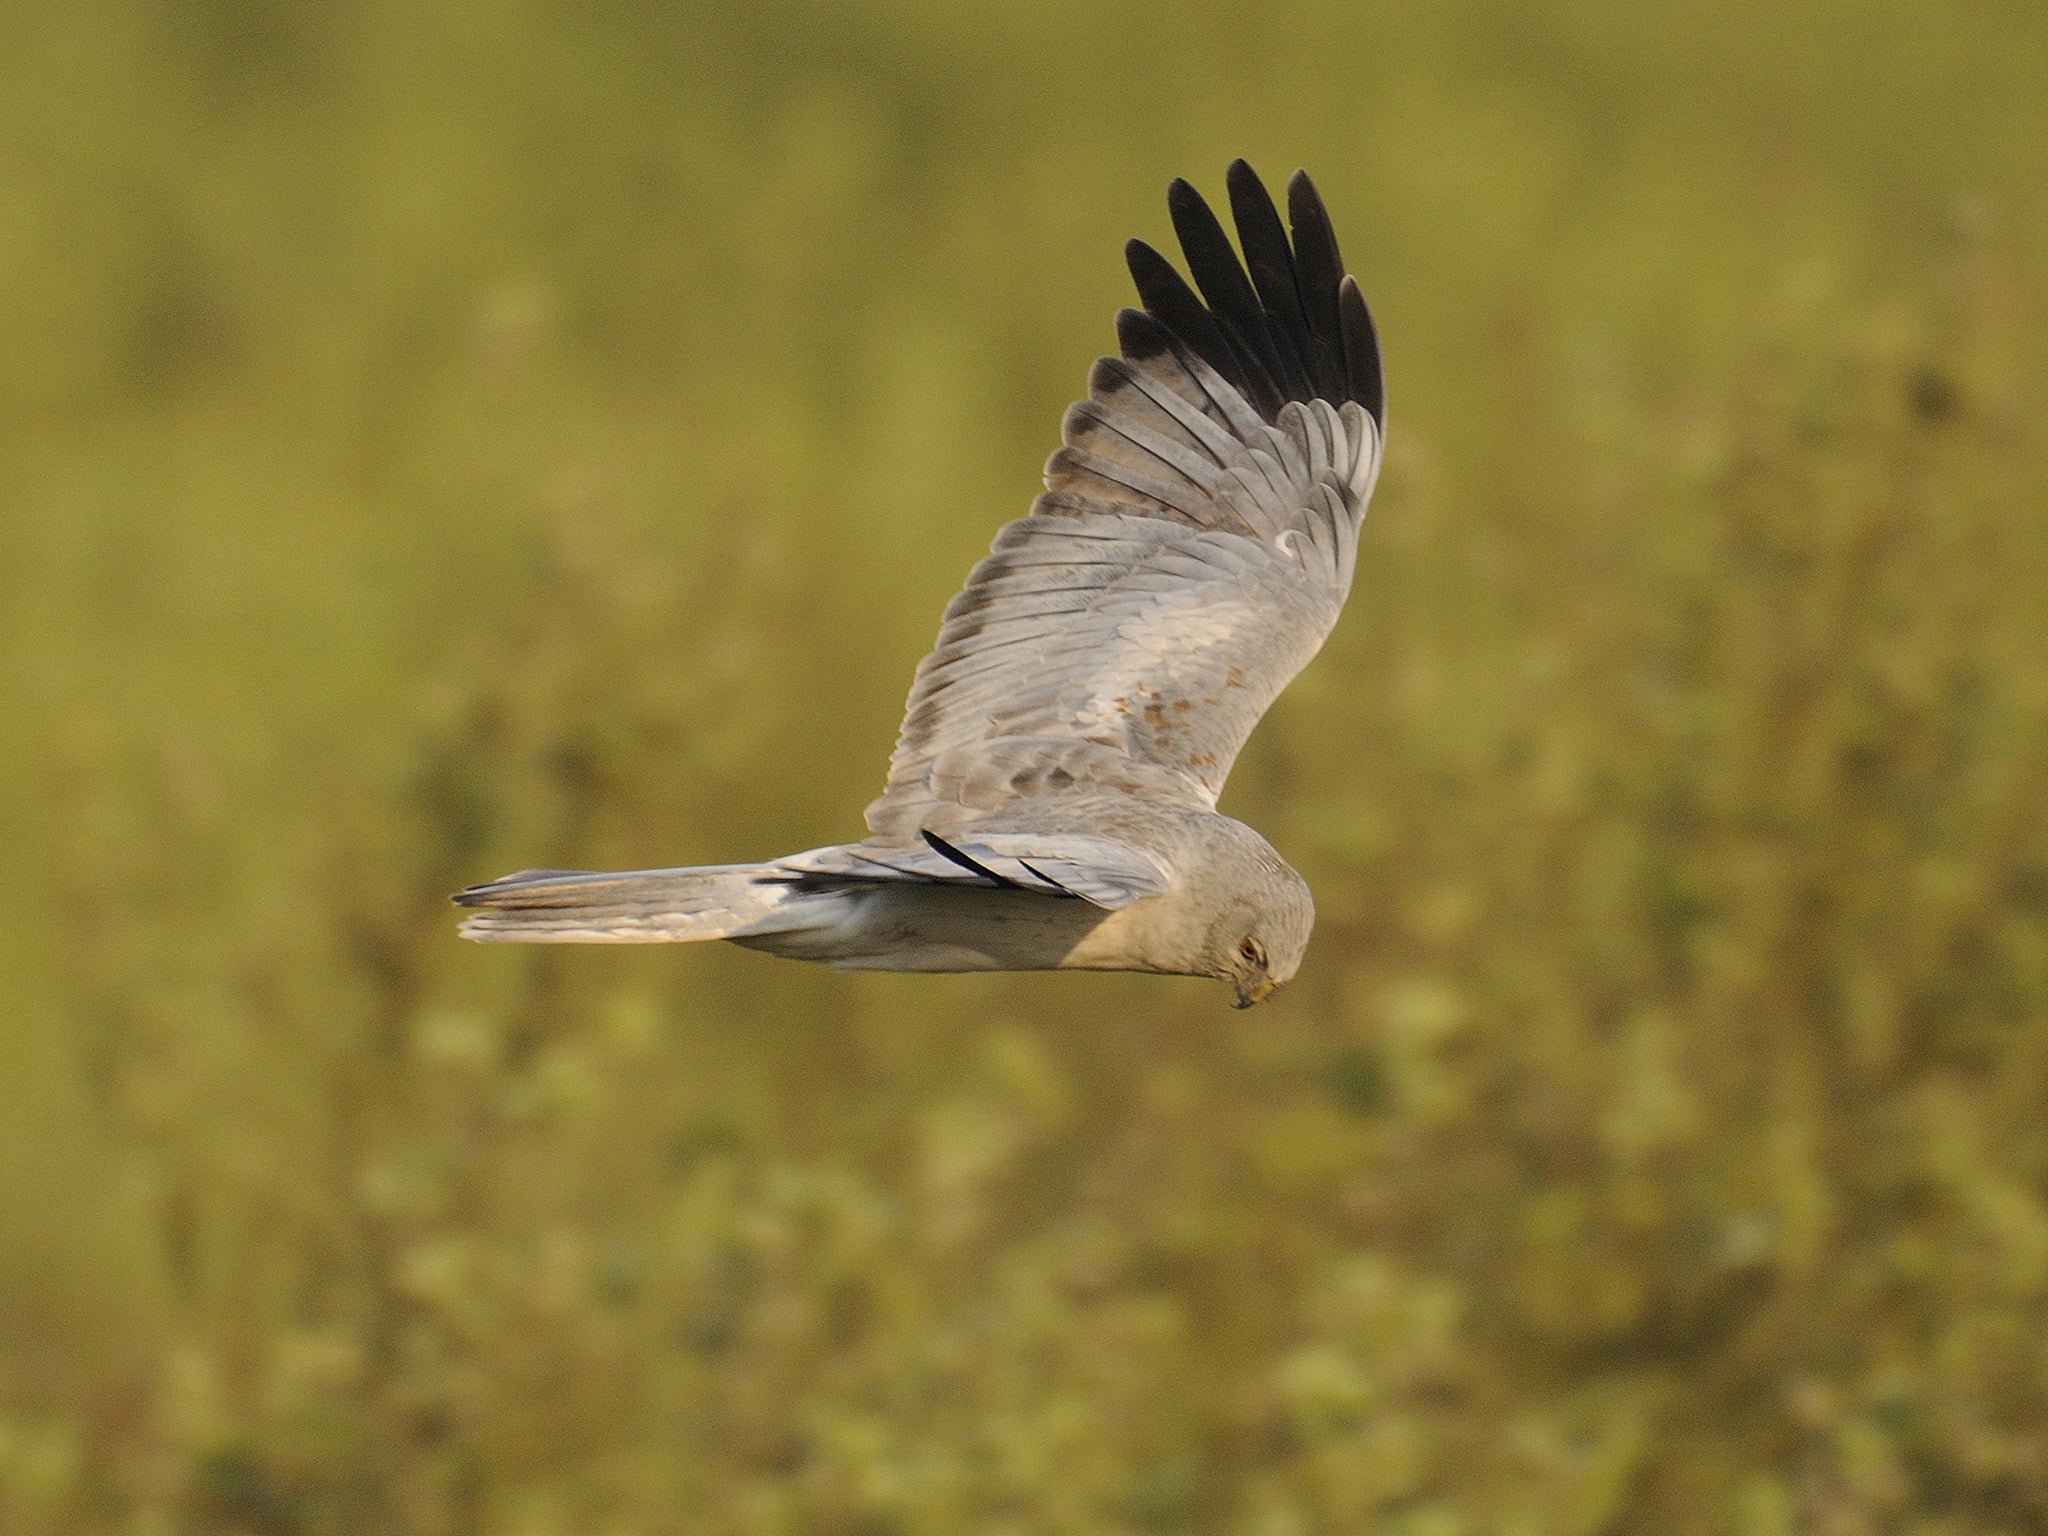 The latest disappearance is the fifth hen harrier this spring to have gone missing